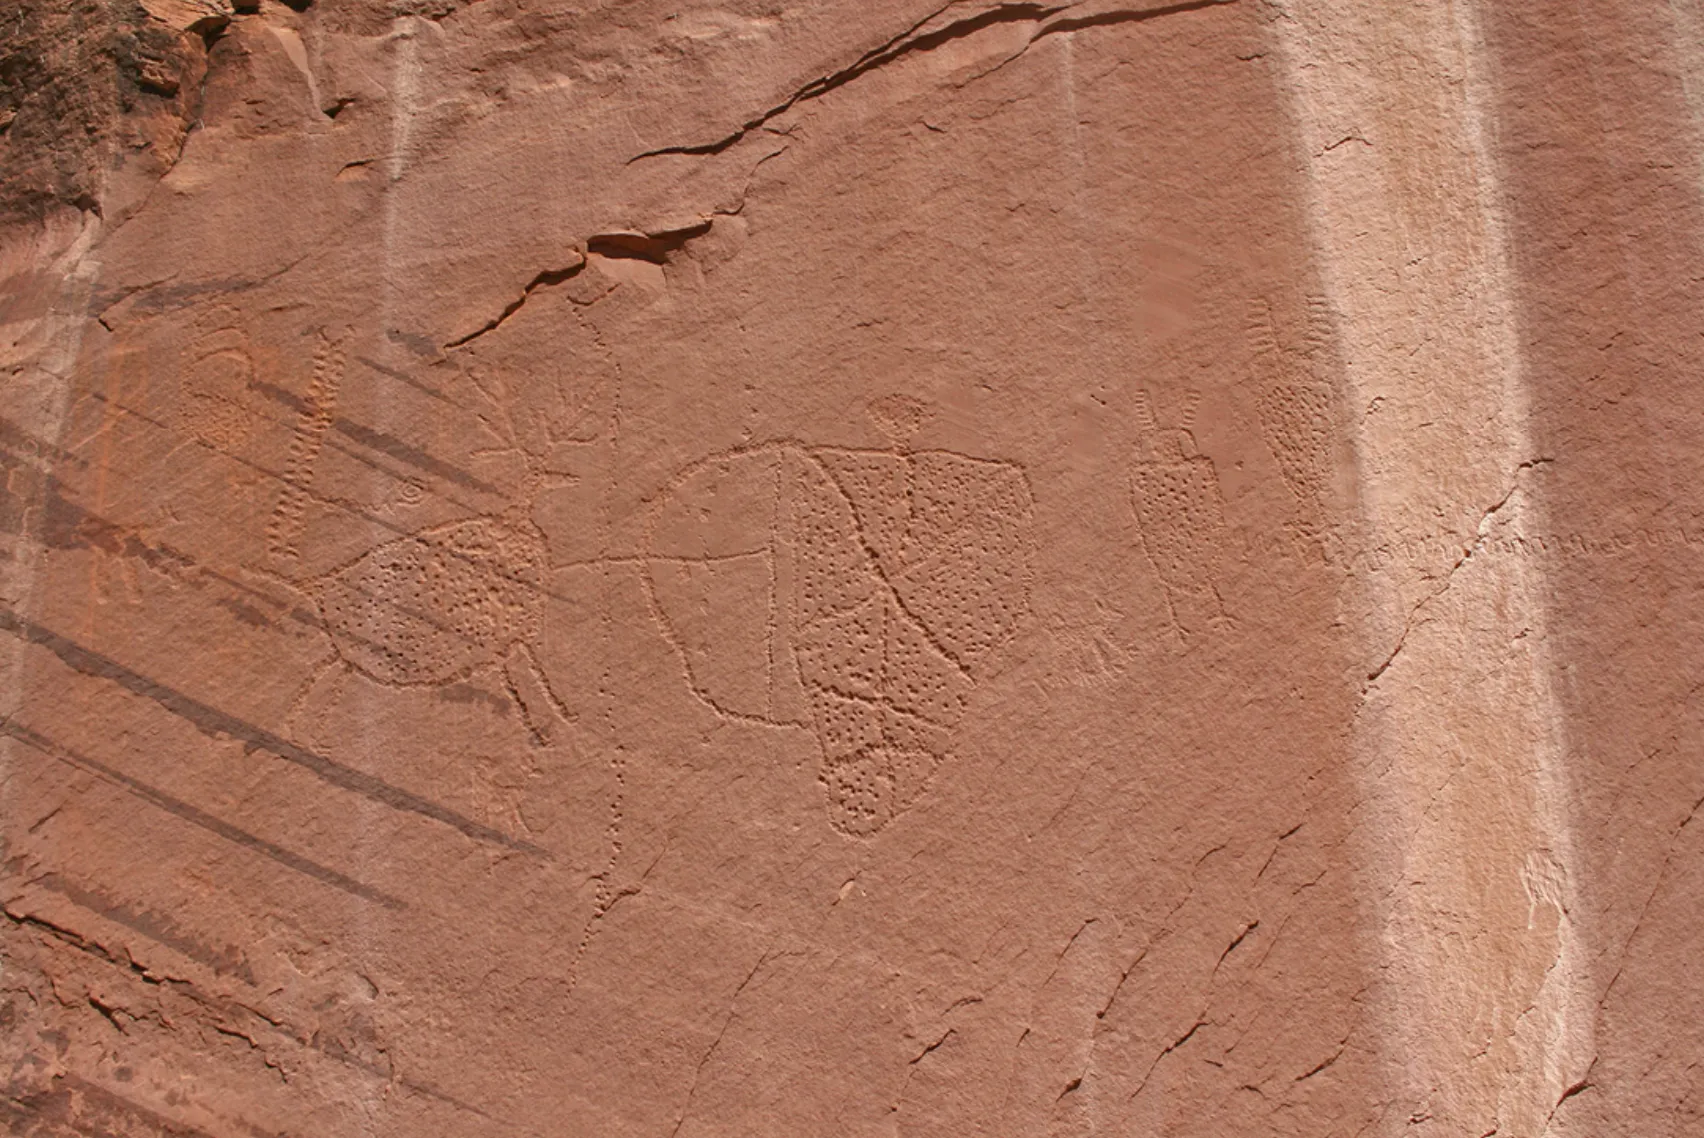 A photograph of a petroglyph somewhere in Arizona